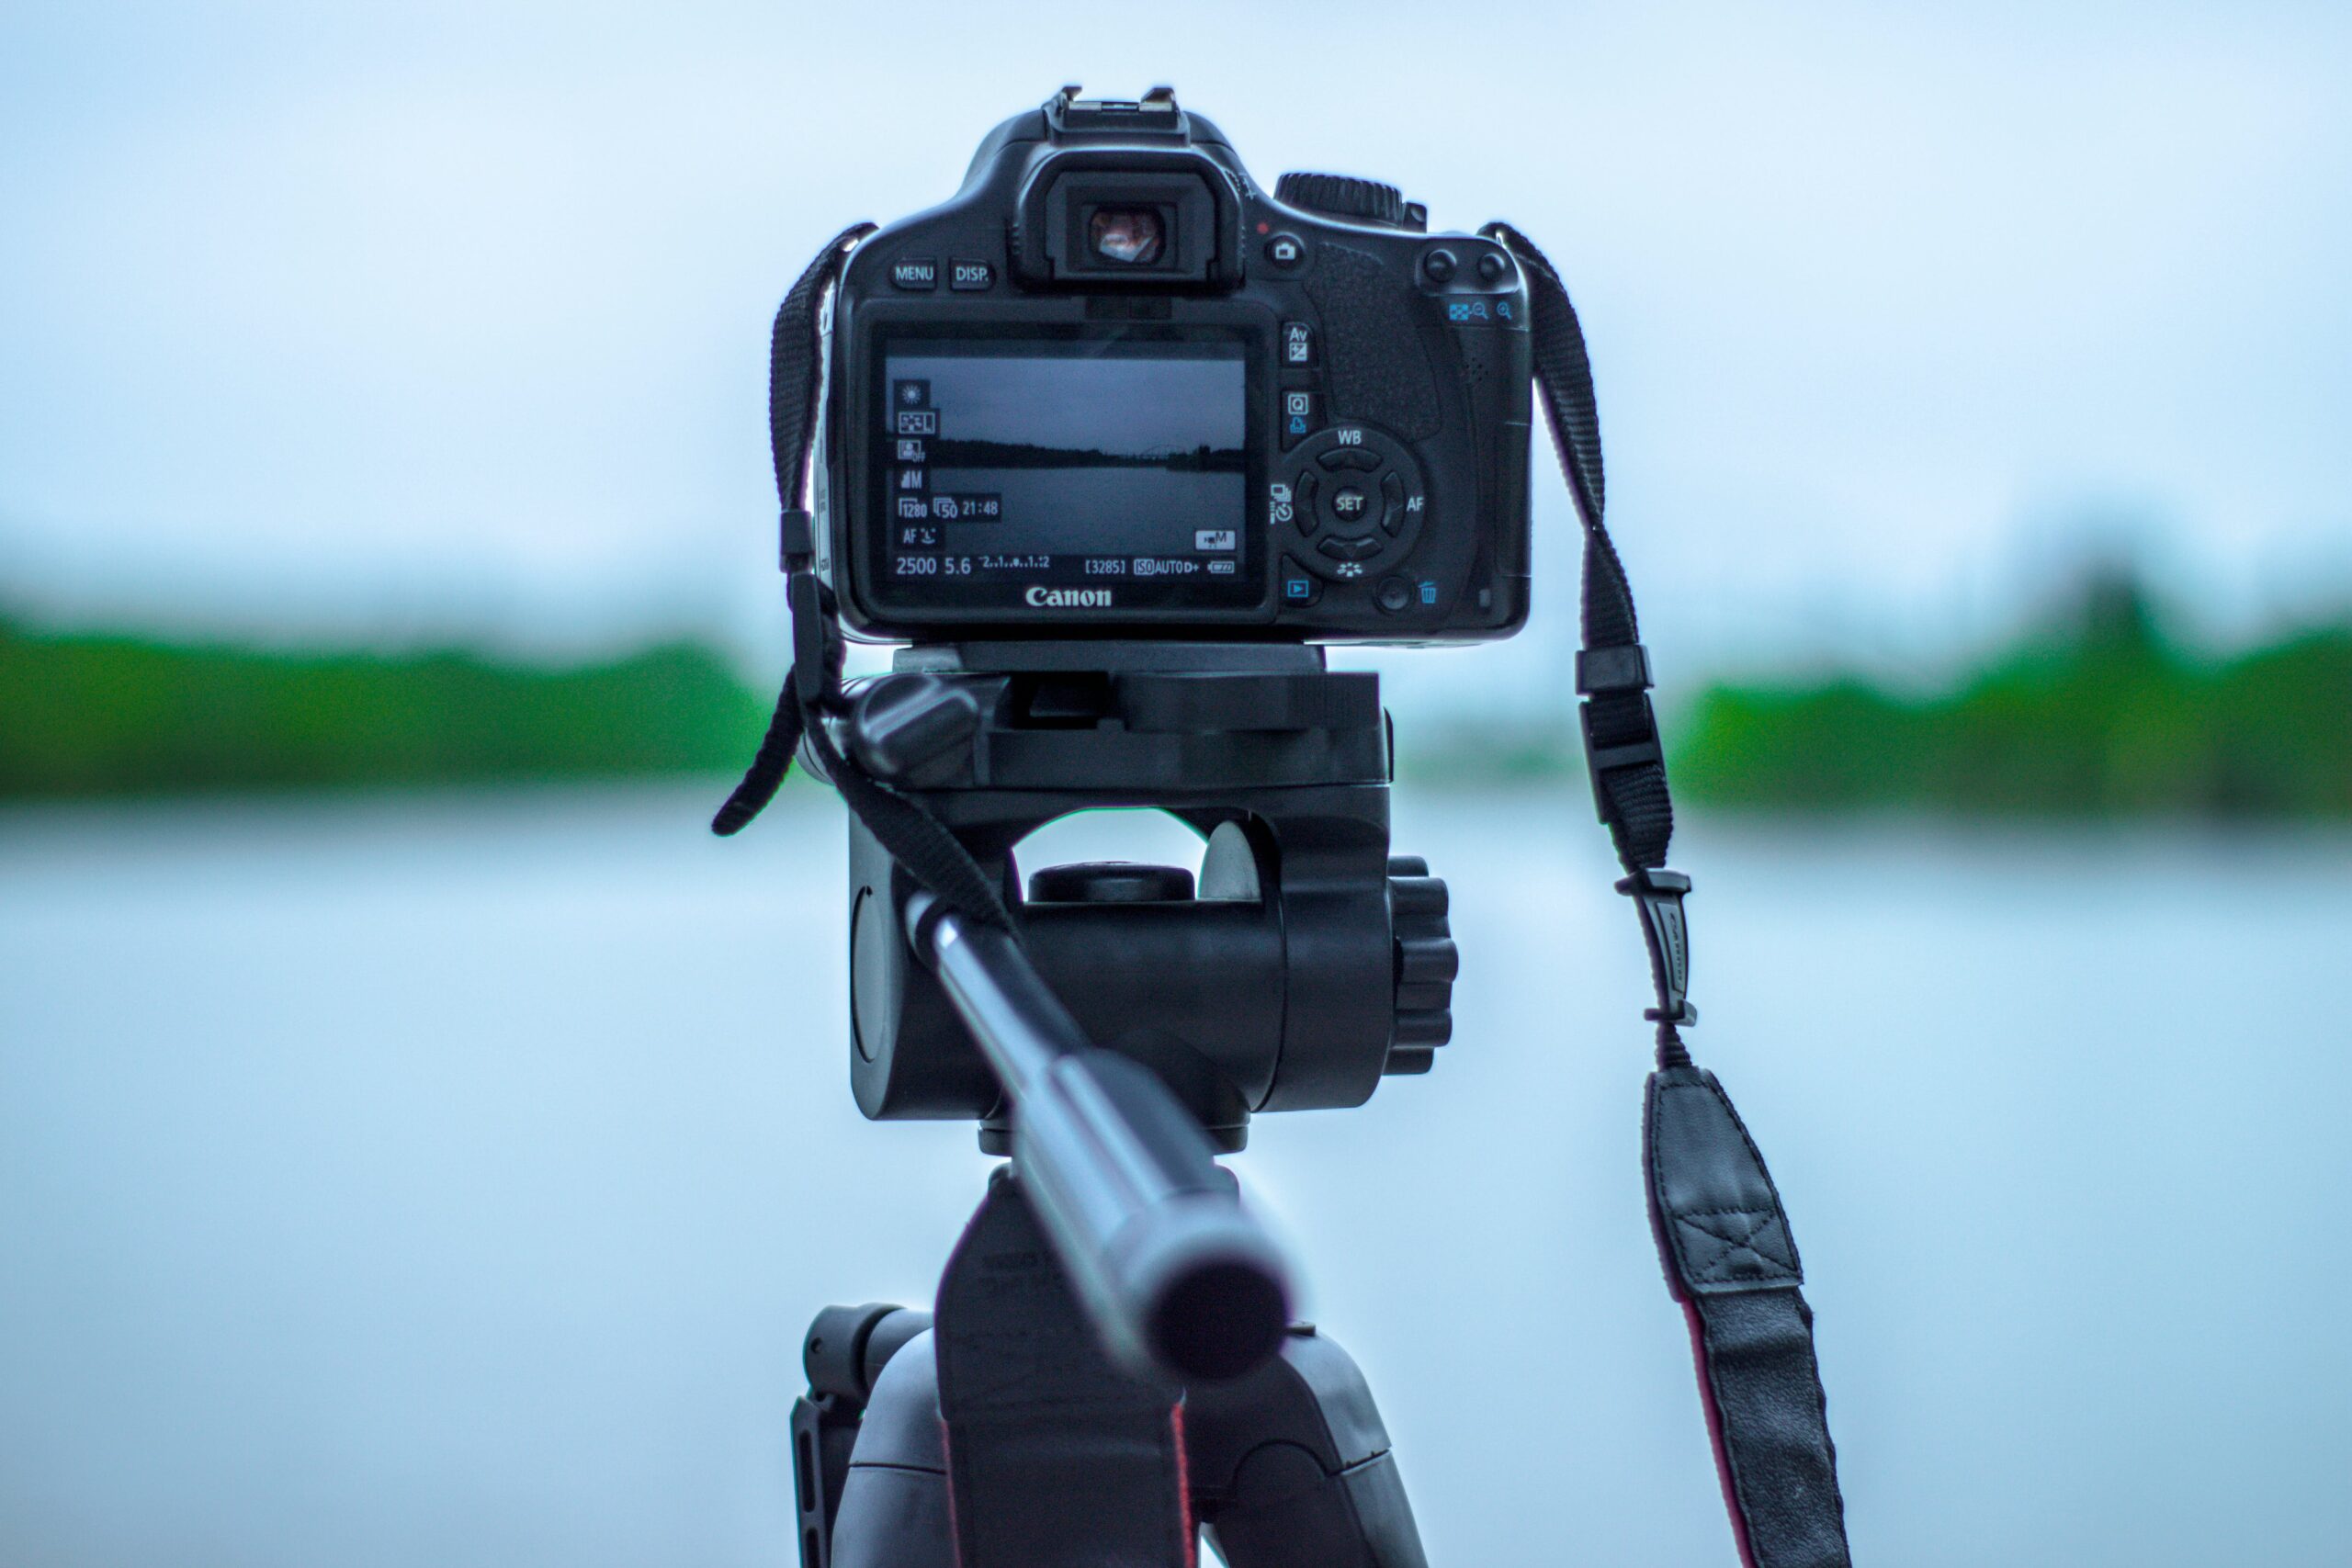 A black camera attached to a tripod in front of a lake.